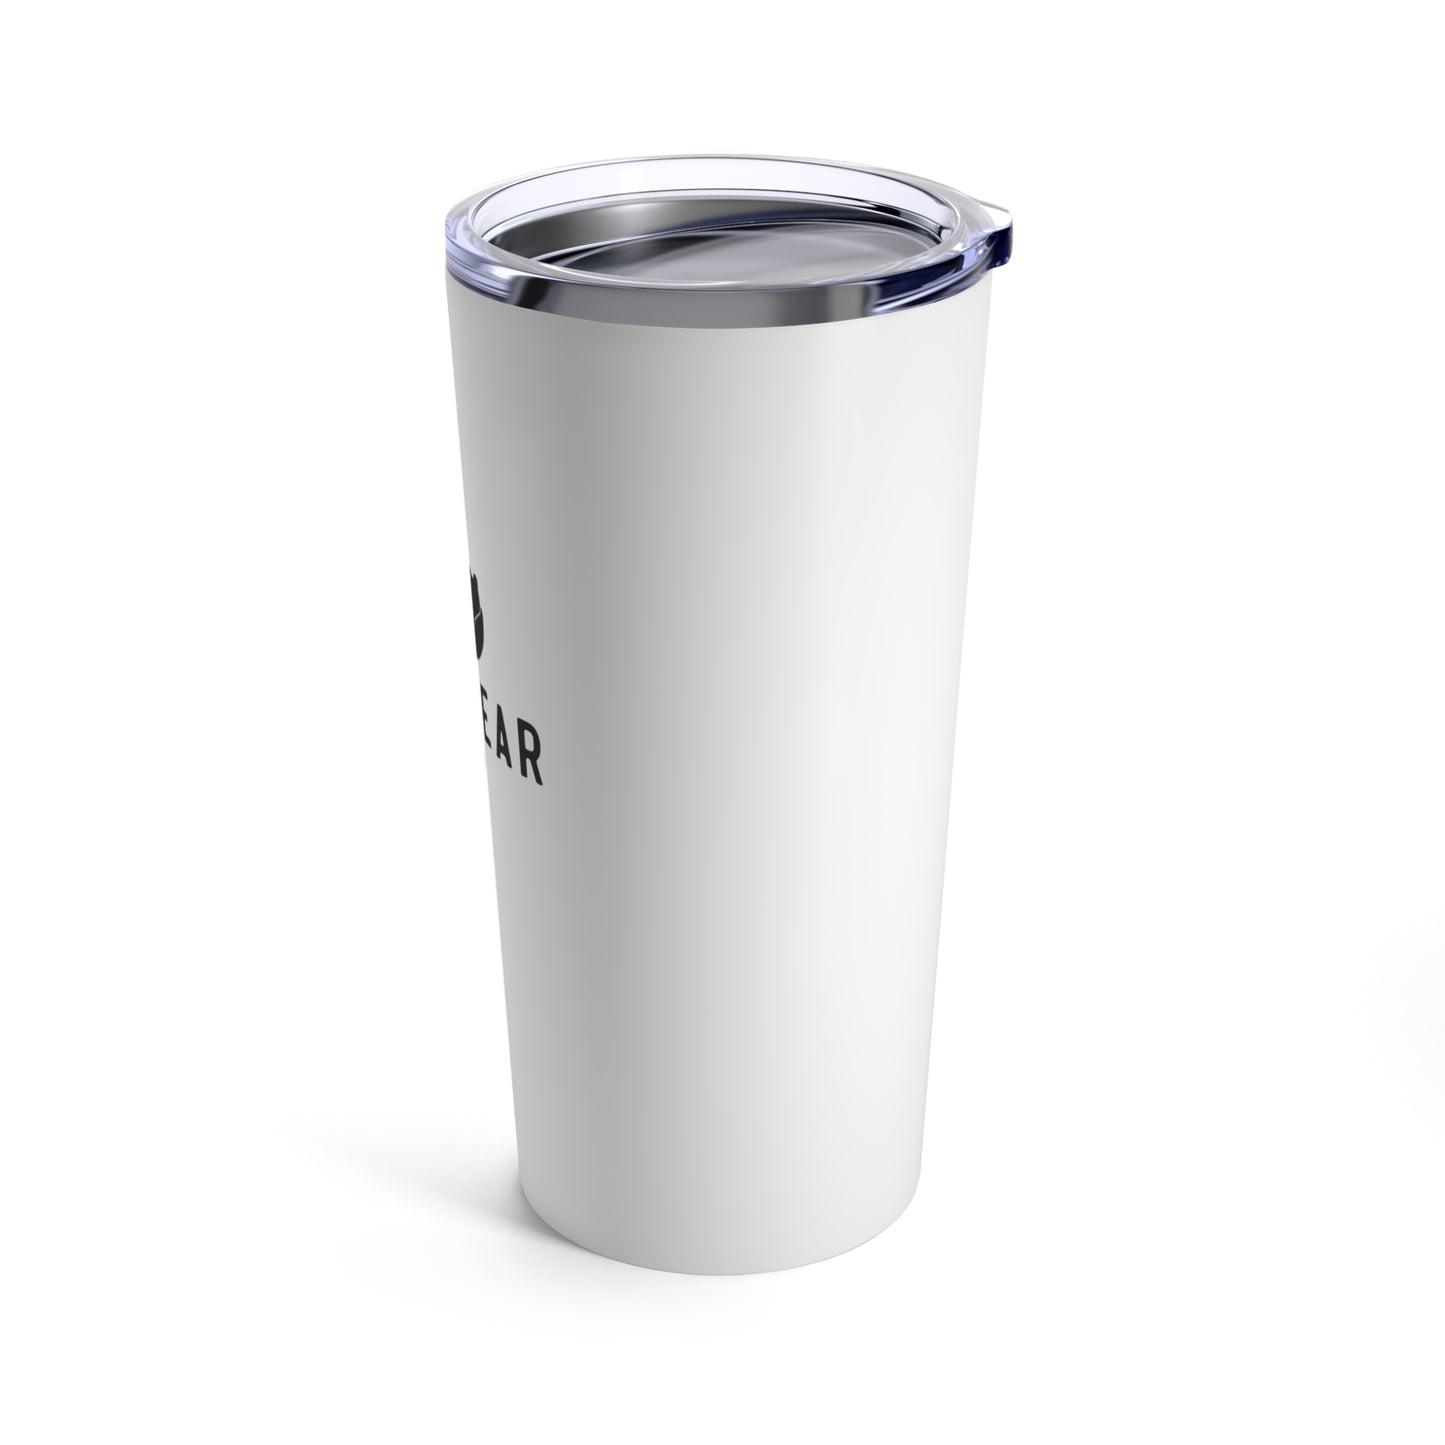 Lazy Bear Outfitters Signature Tumbler, white 20oz